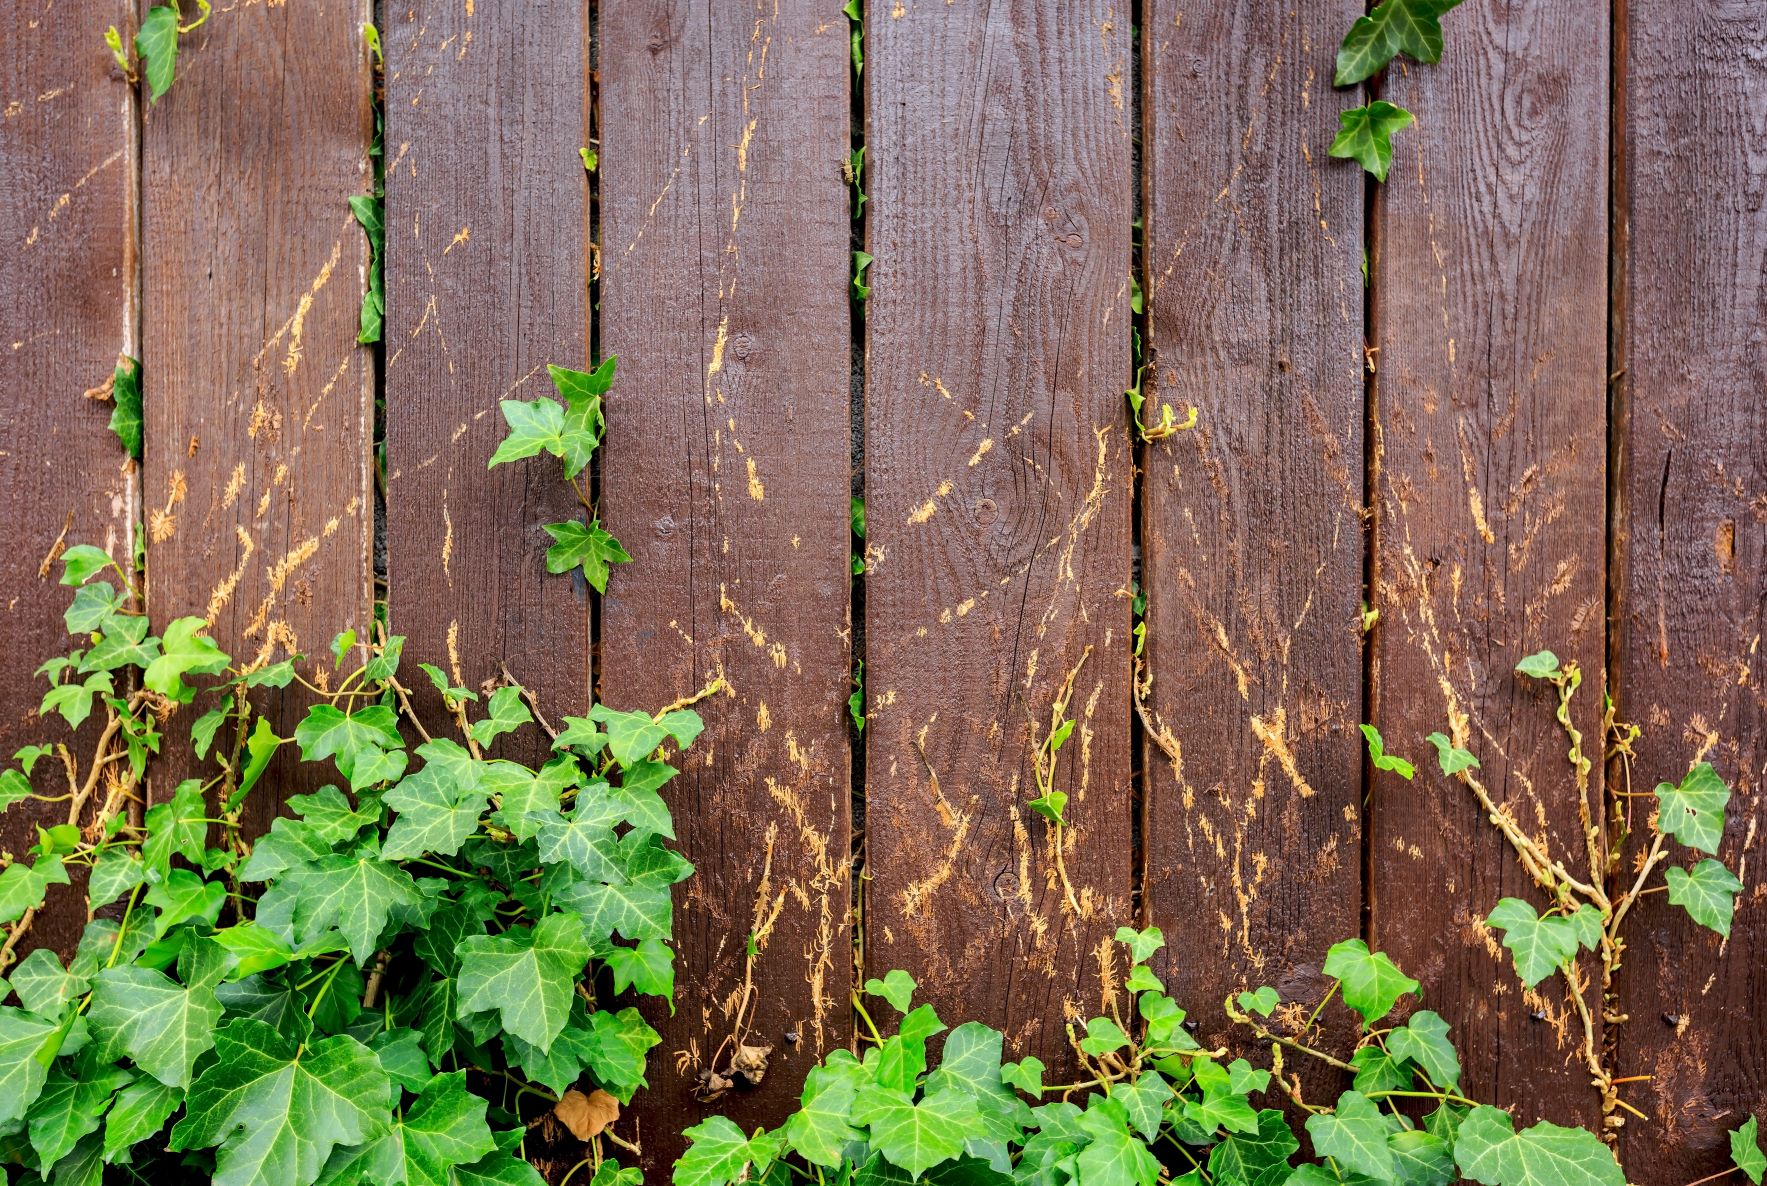 Poison ivy climbing up a wooden fence.